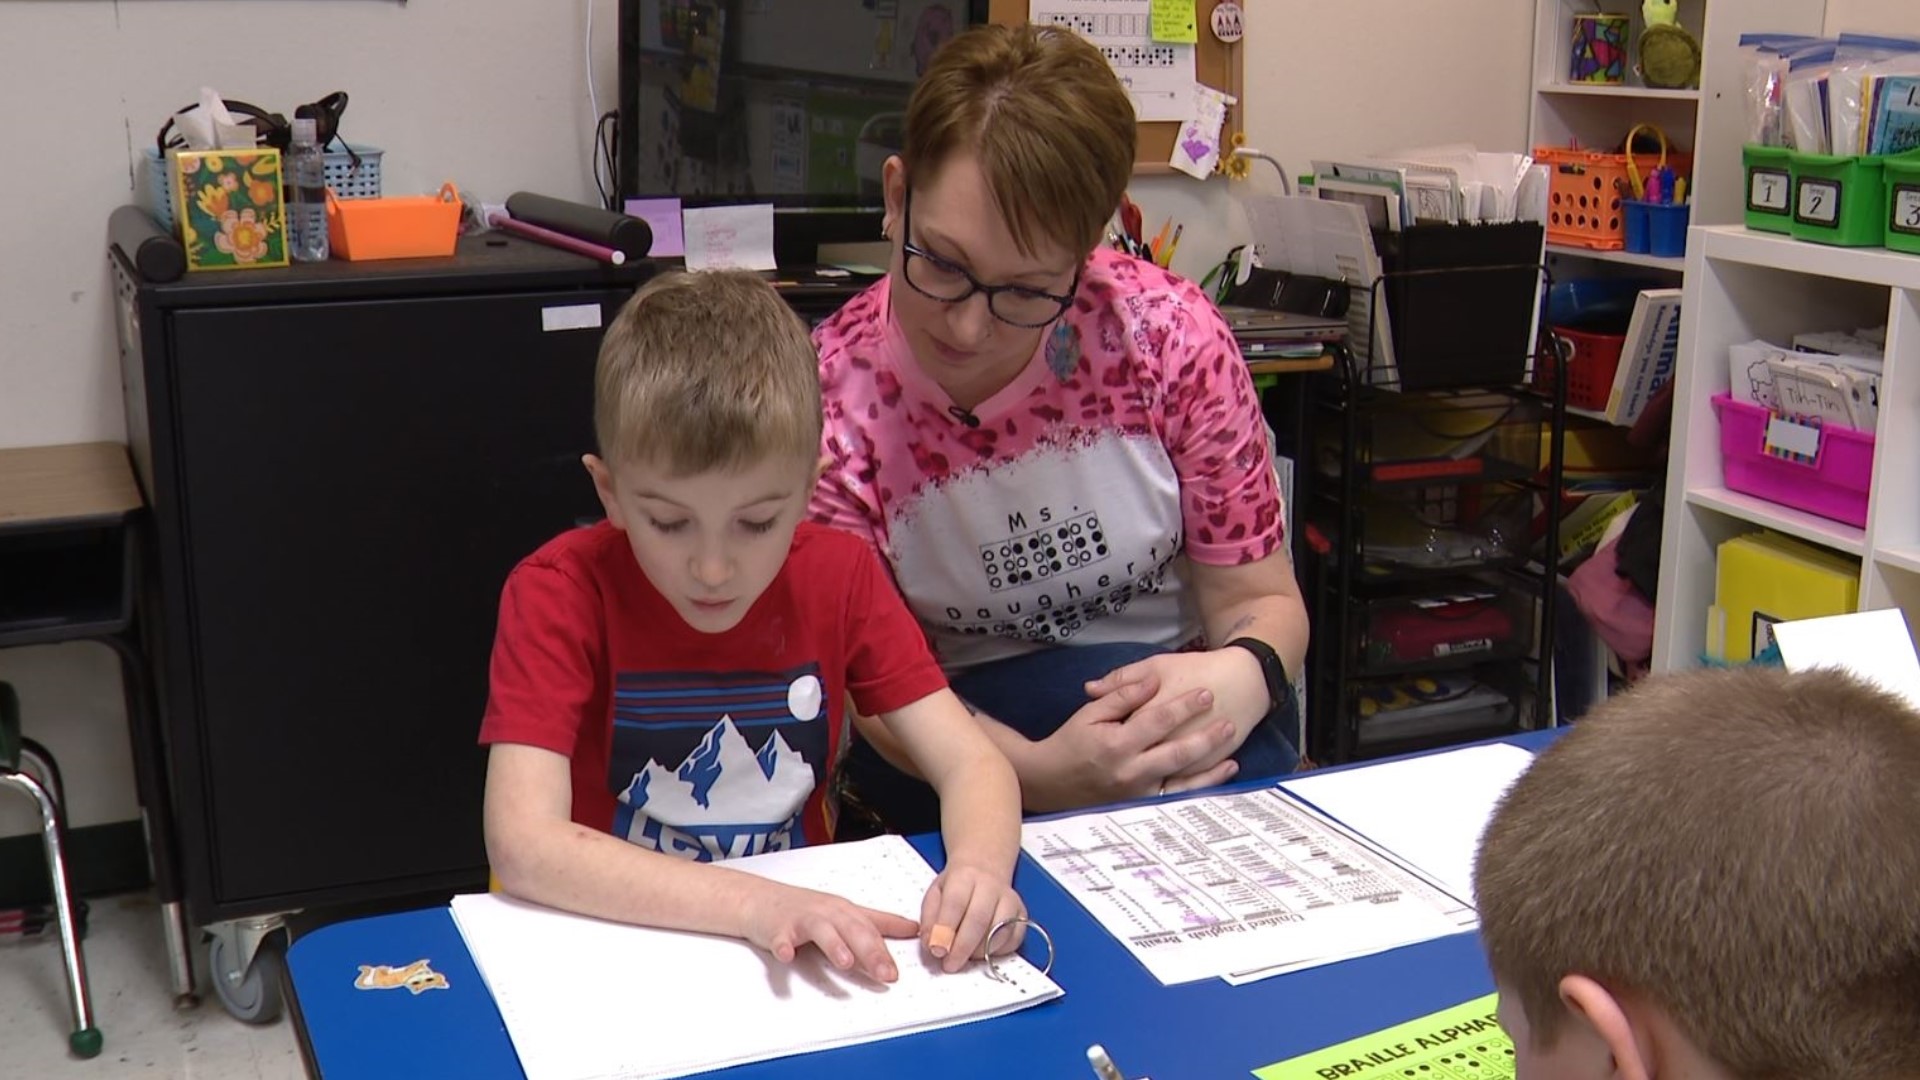 A paraprofessional has helped Gage create a more inclusive and better world in his school.